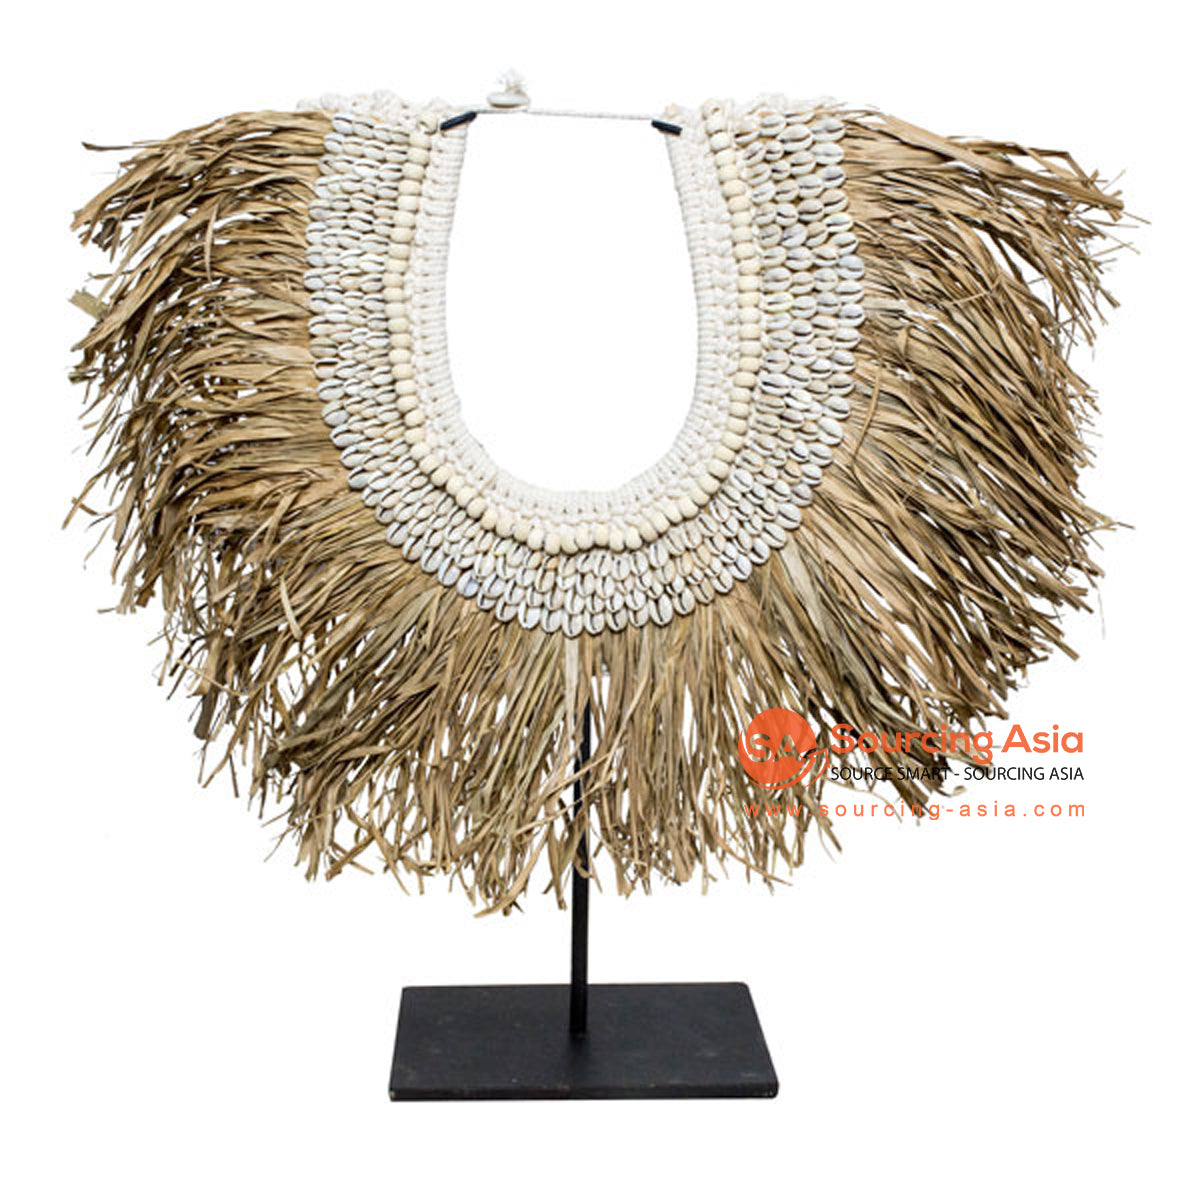 SHL169-20 NATURAL SHELL NECKLACE ON STAND DECORATION